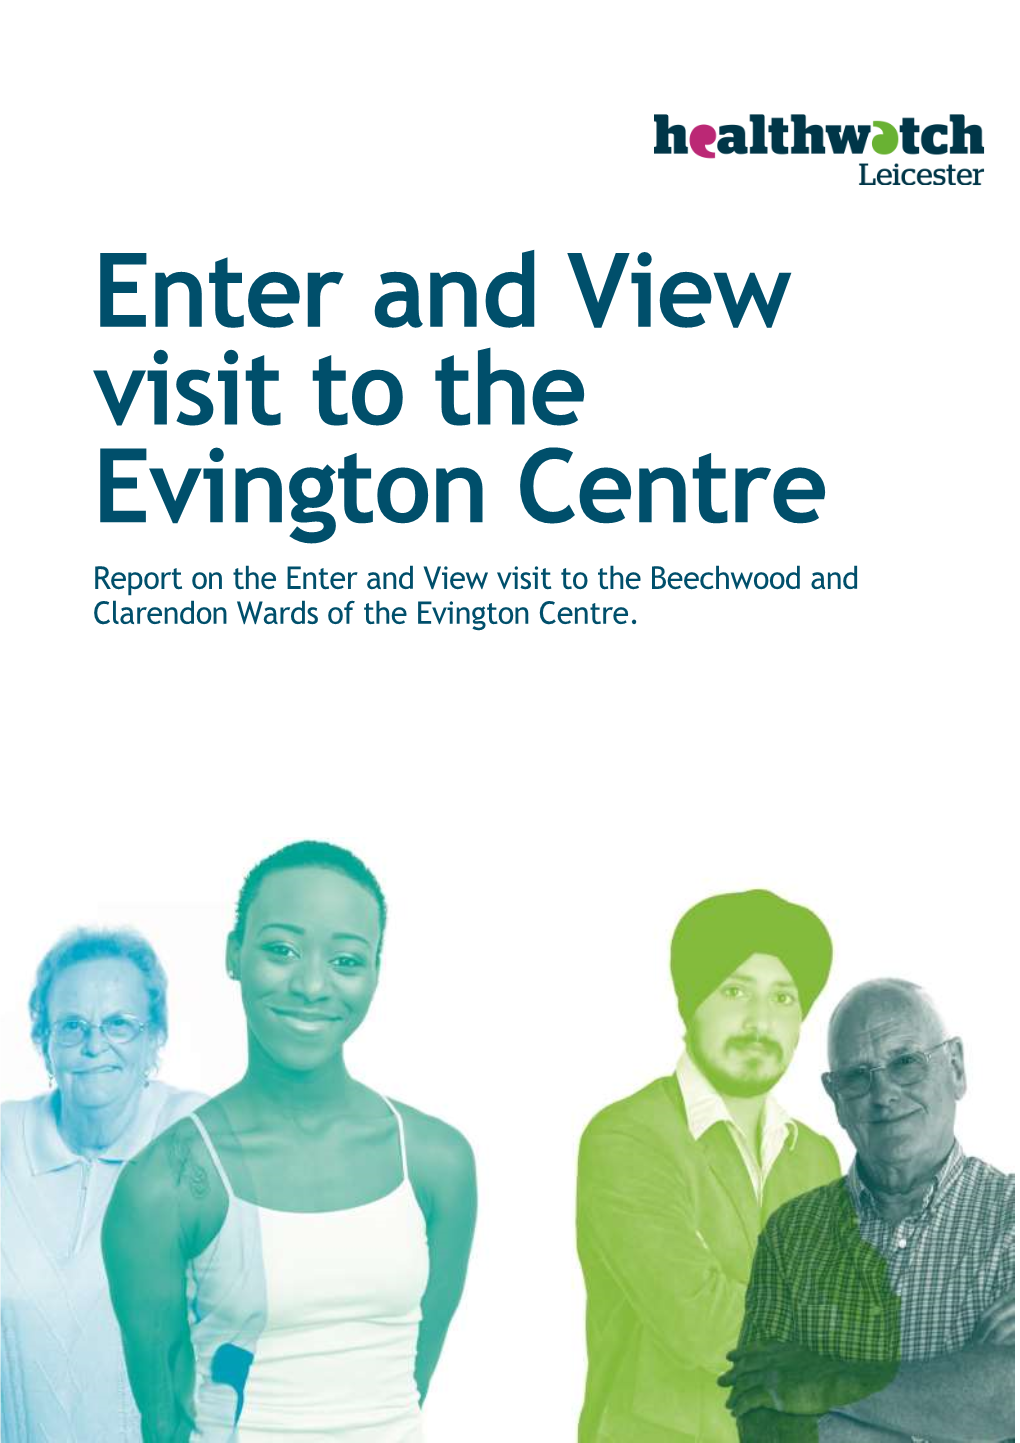 Enter and View Visit to the Evington Centre Report on the Enter and View Visit to the Beechwood and Clarendon Wards of the Evington Centre